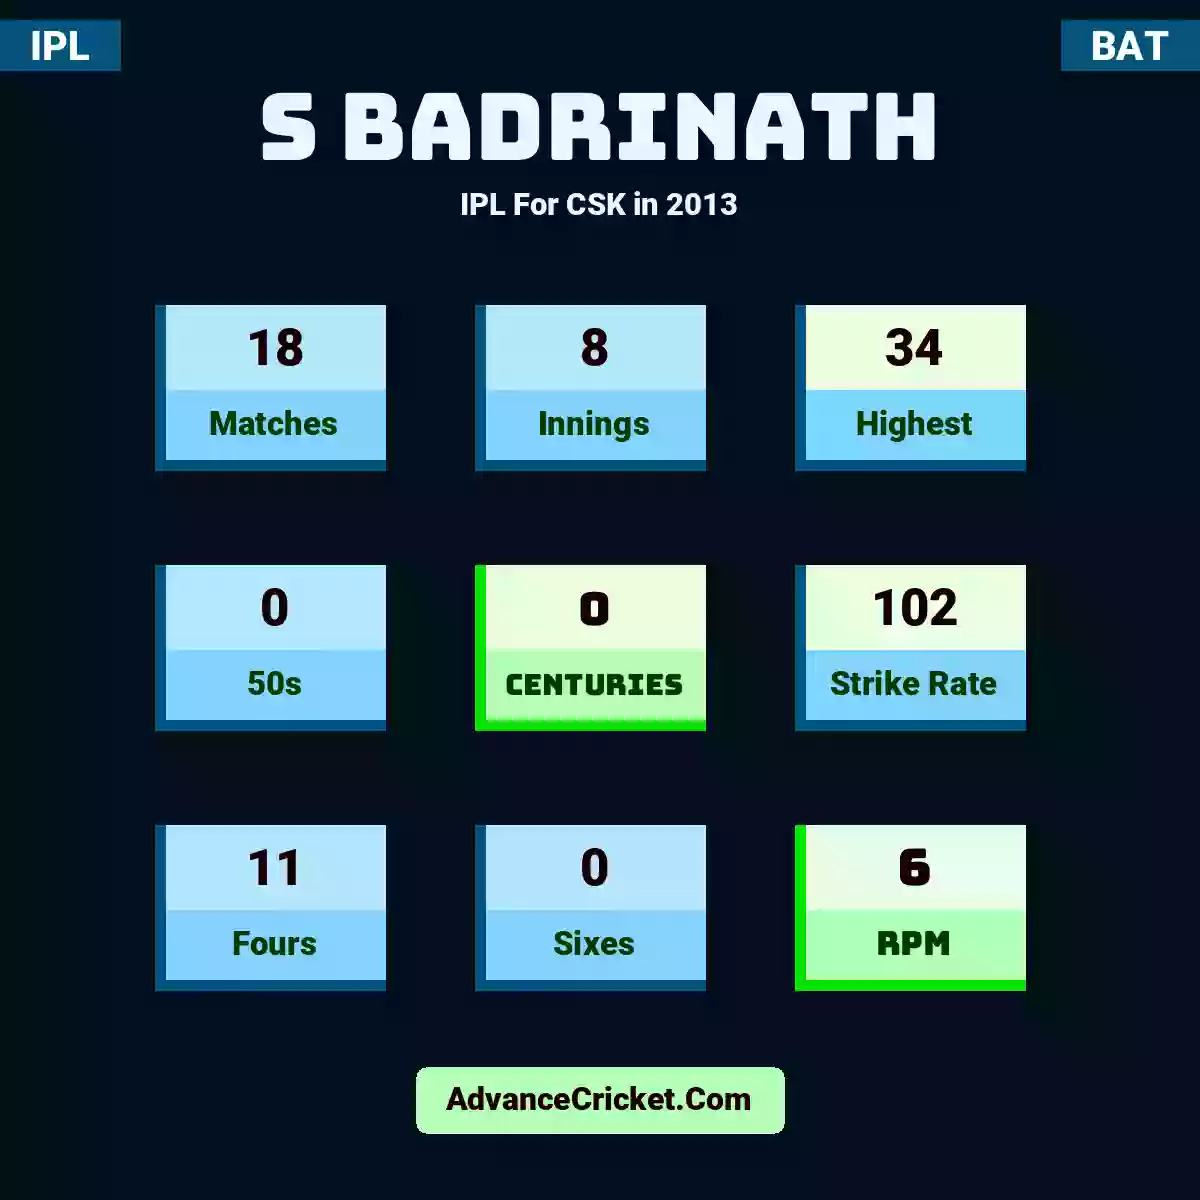 S Badrinath IPL  For CSK in 2013, S Badrinath played 18 matches, scored 34 runs as highest, 0 half-centuries, and 0 centuries, with a strike rate of 102. S.Badrinath hit 11 fours and 0 sixes, with an RPM of 6.